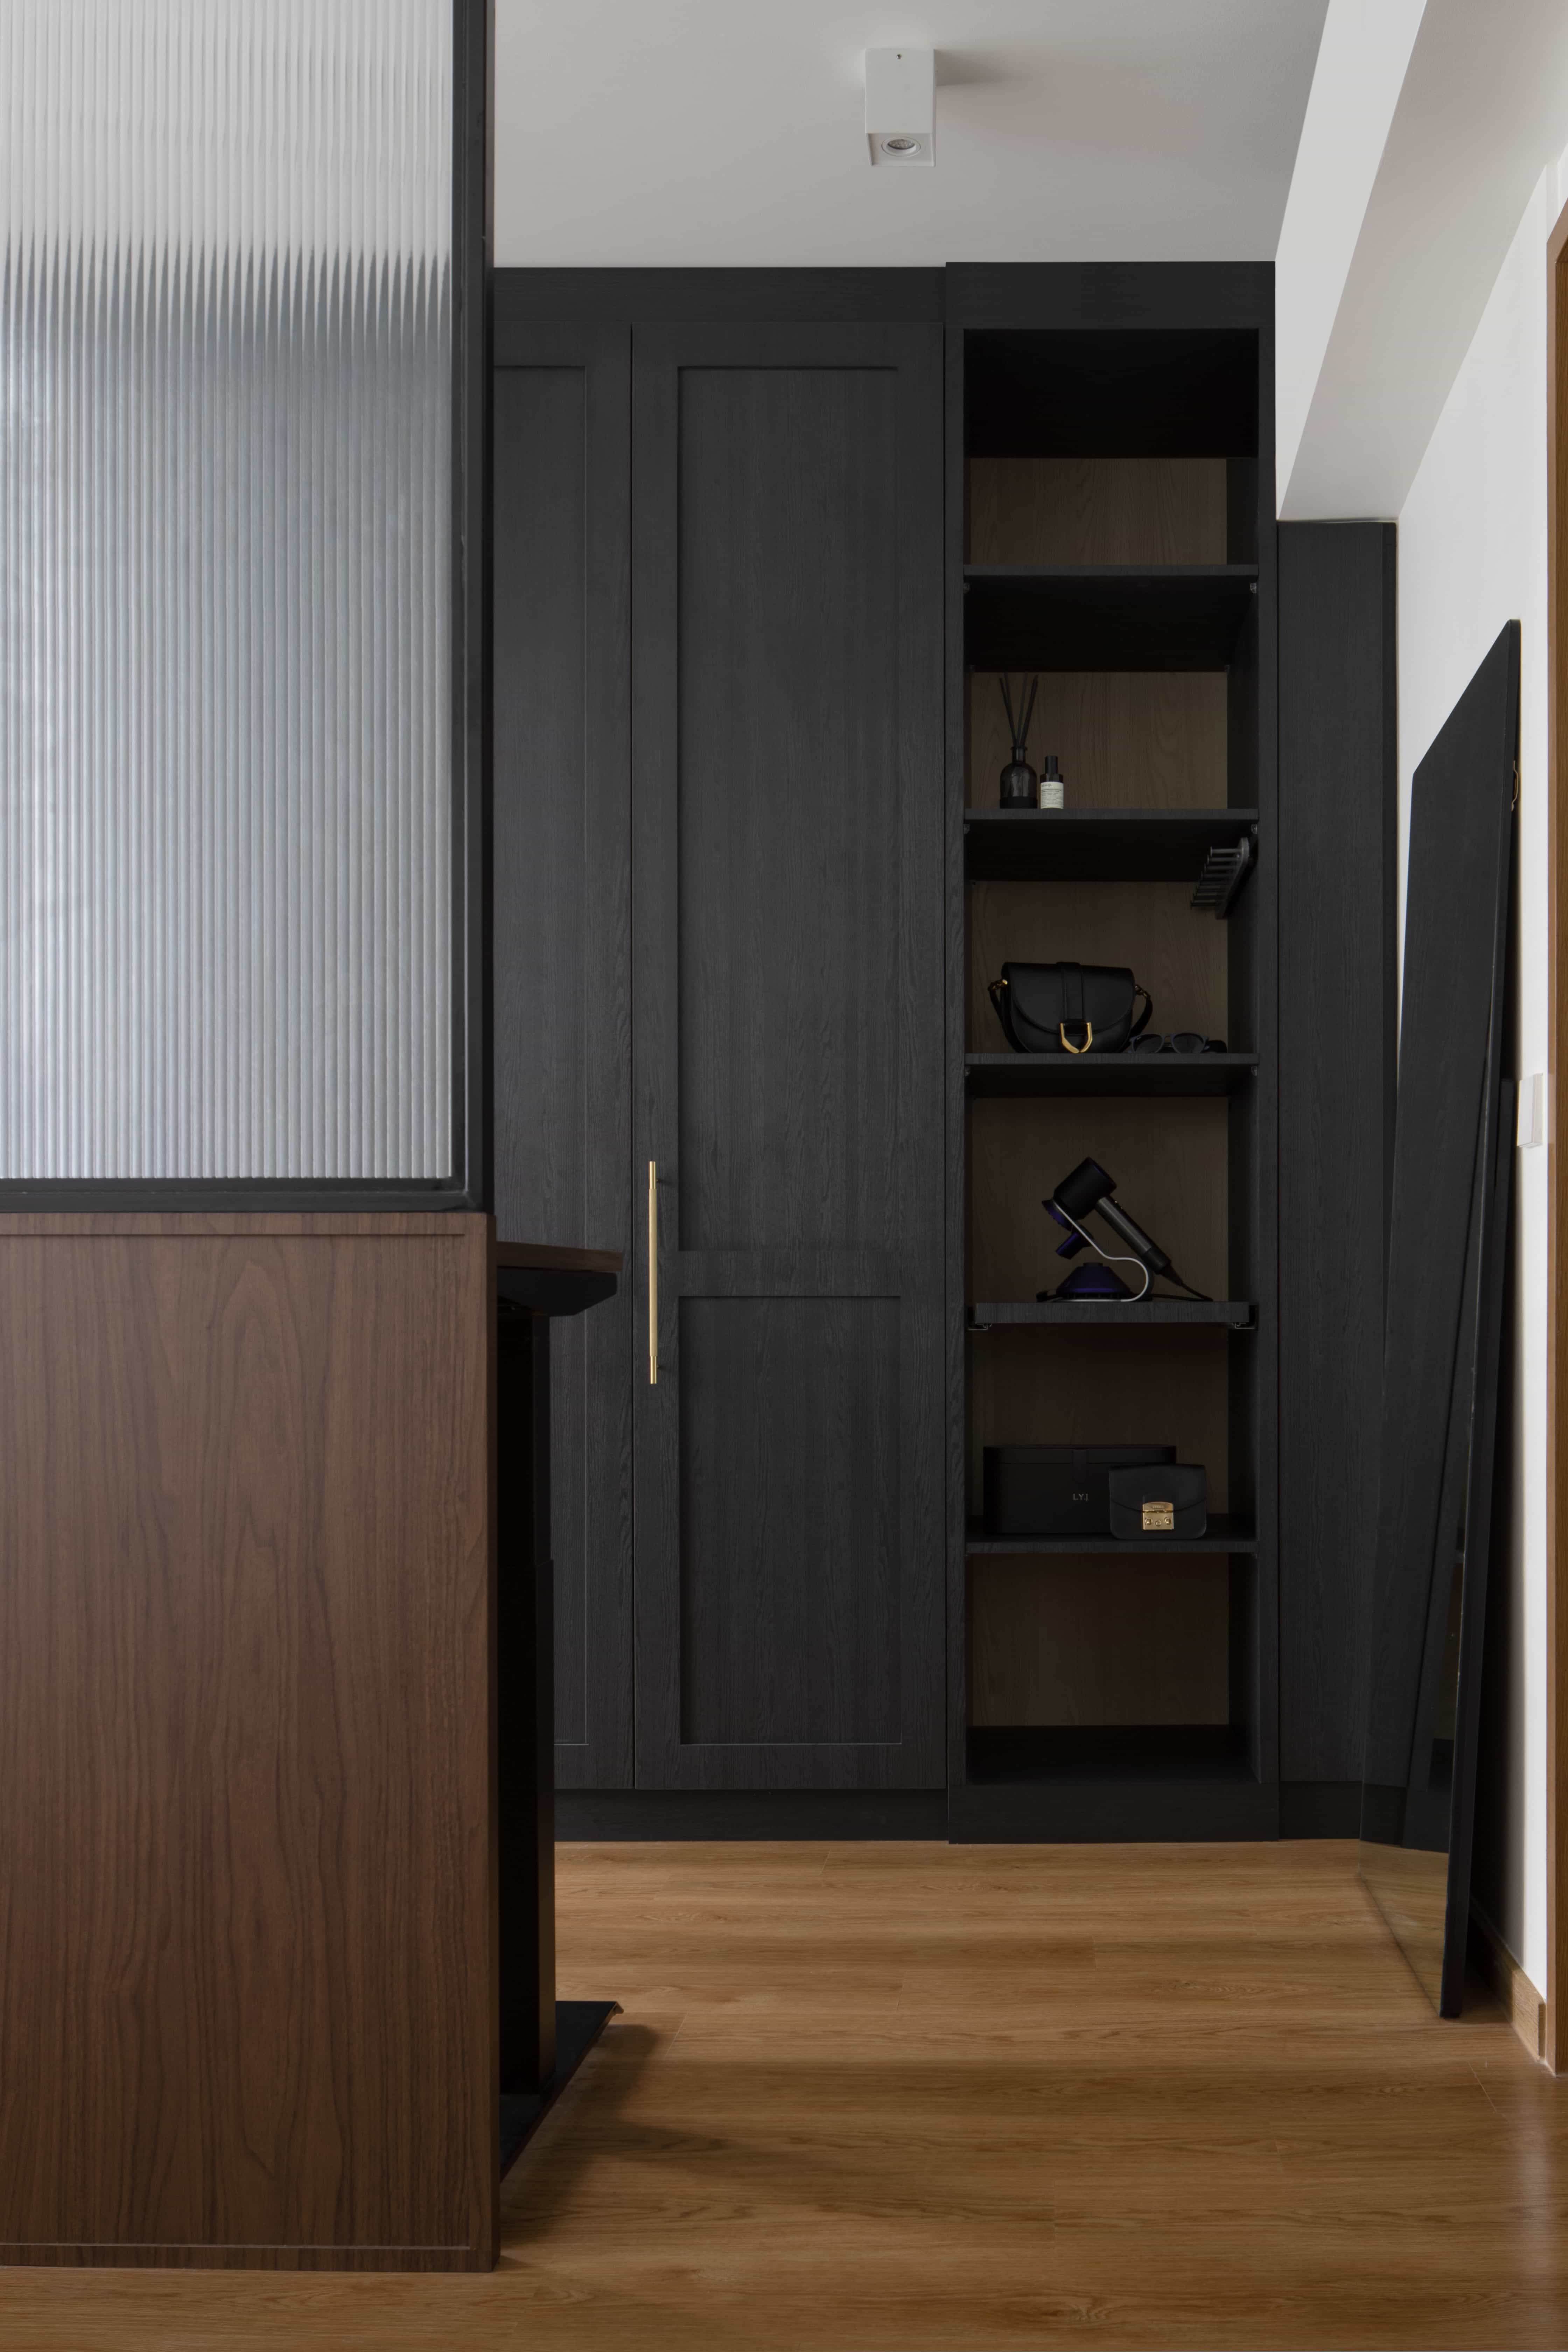 Dark wood wardrobe with open shelves displaying accessories in a stylish room.